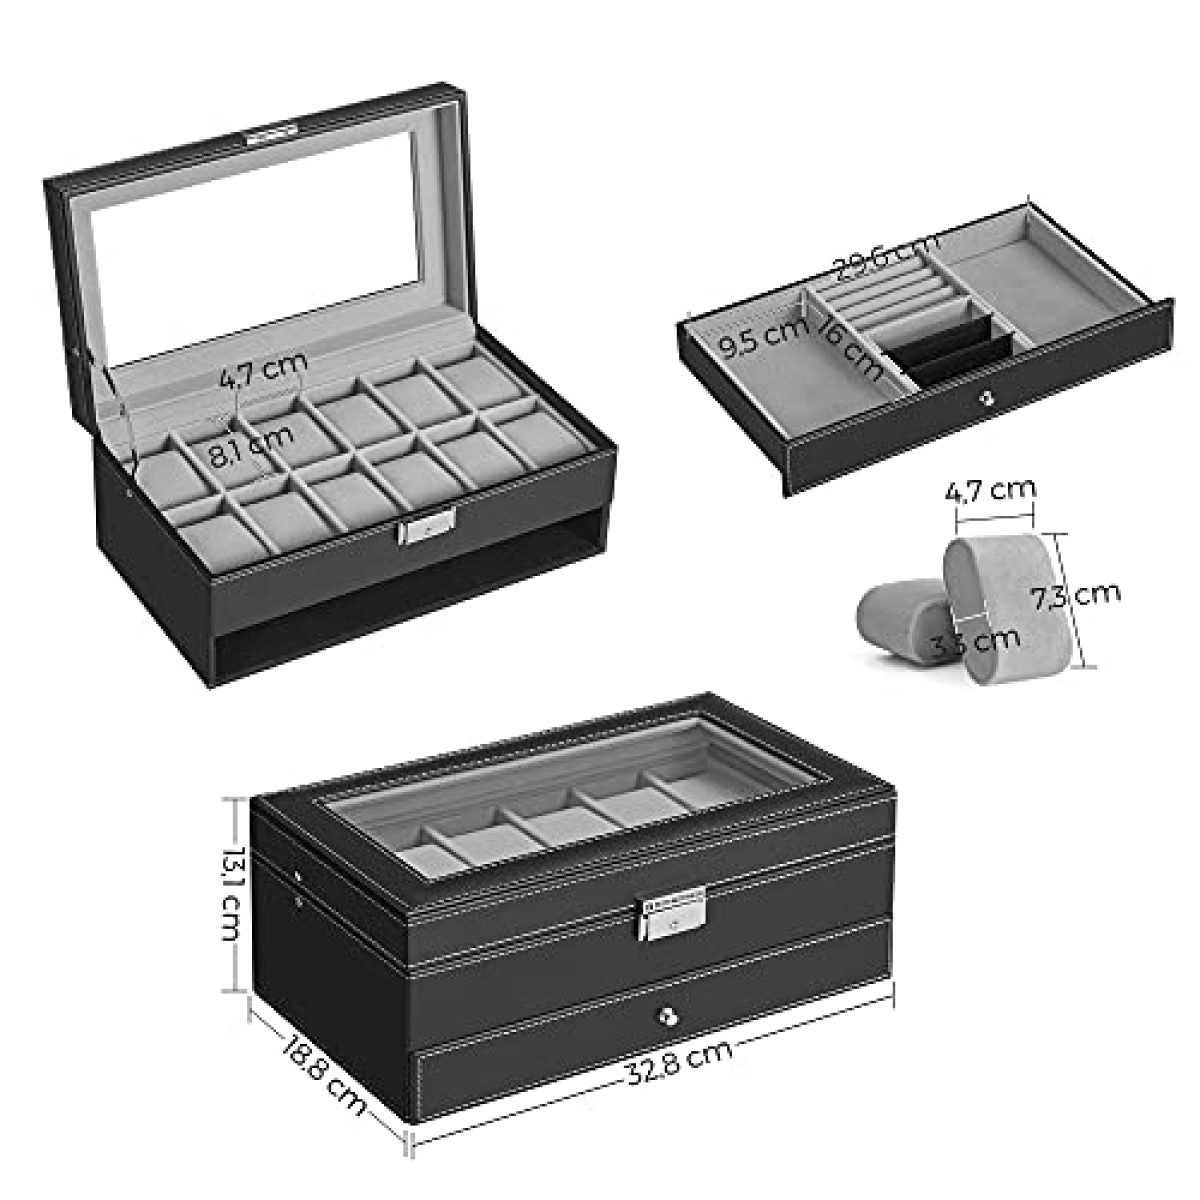 SONGMICS Watch Box, Watch Case with Glass Lid, 2-Tier Watch Display Case for 12 Watches, Lockable, 1 Drawer, for Rings, Bracelets, Gift Idea, Black Synthetic Leather, Grey Lining JWB012G01